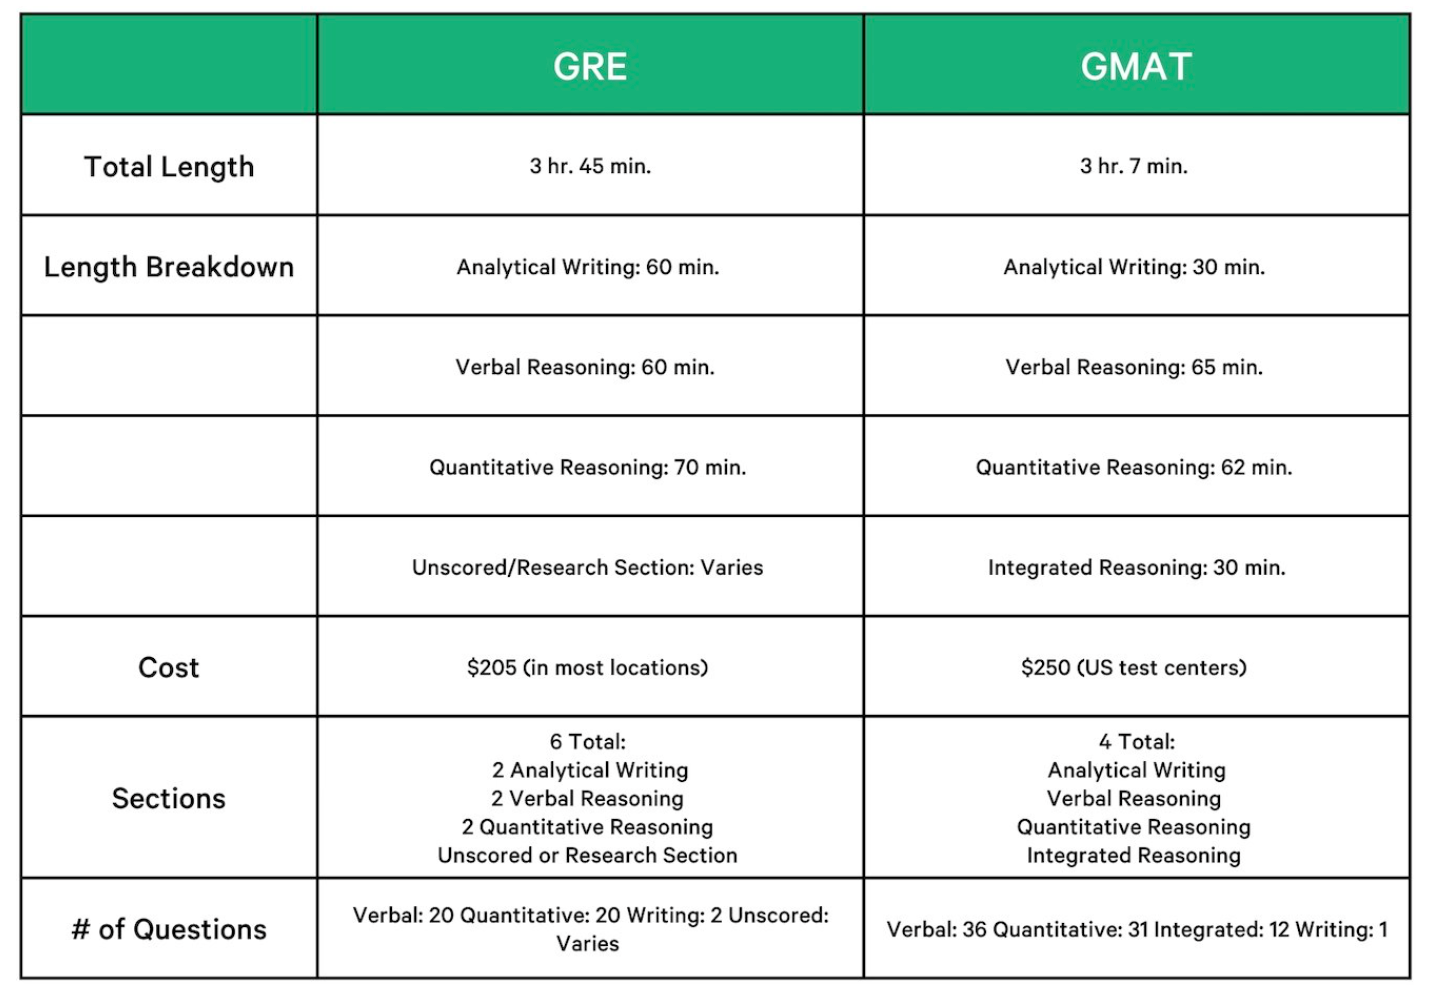 A Nuts and Bolts Guide to the GRE and GMAT: Comparisons, Scoring